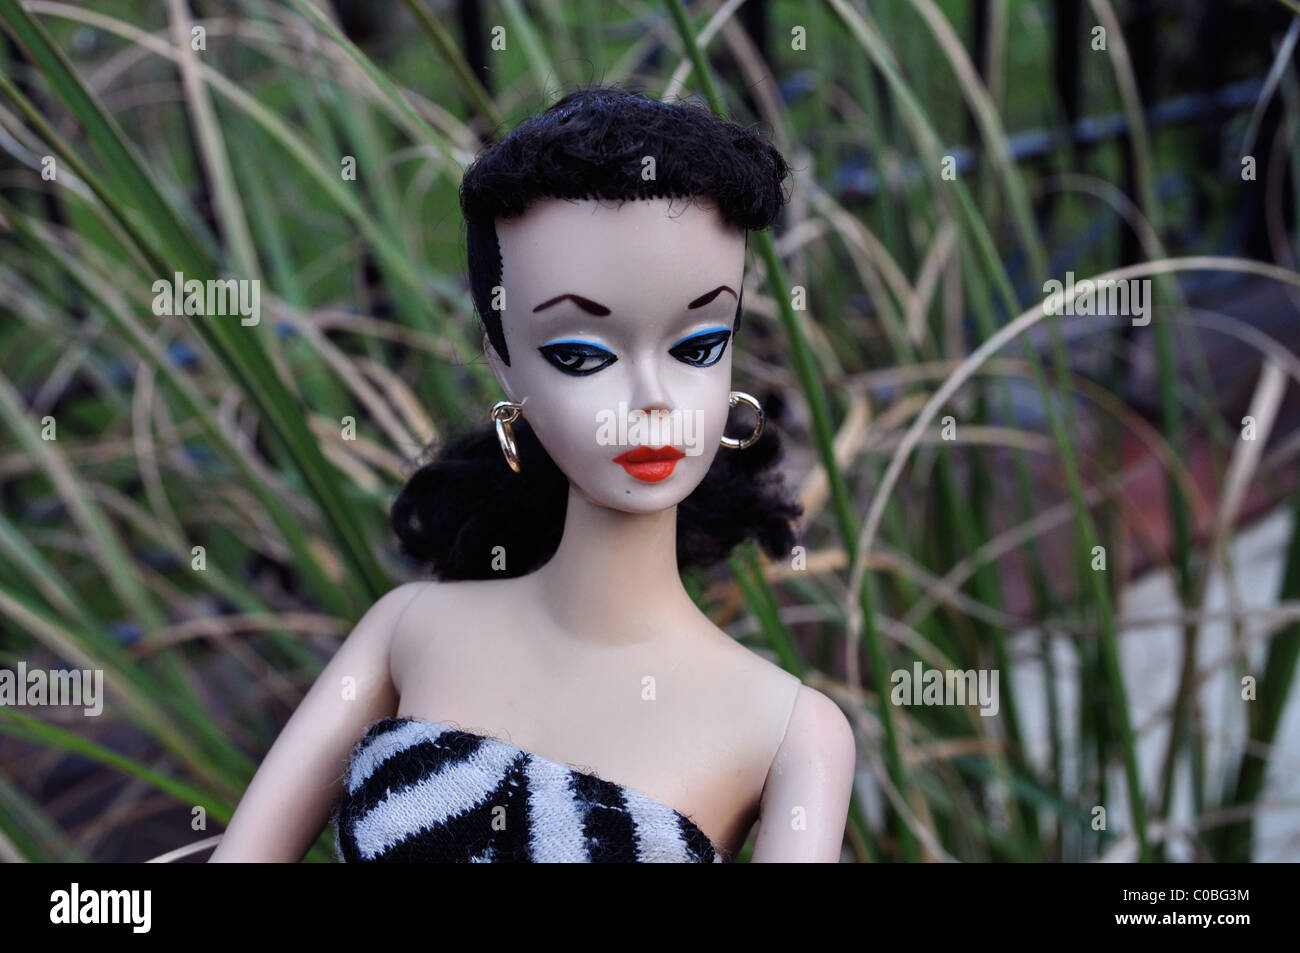 First Barbie doll made by Mattel in 1959 with arched eyebrows and black and  white painted eyes in original zebra swimsuit Stock Photo - Alamy